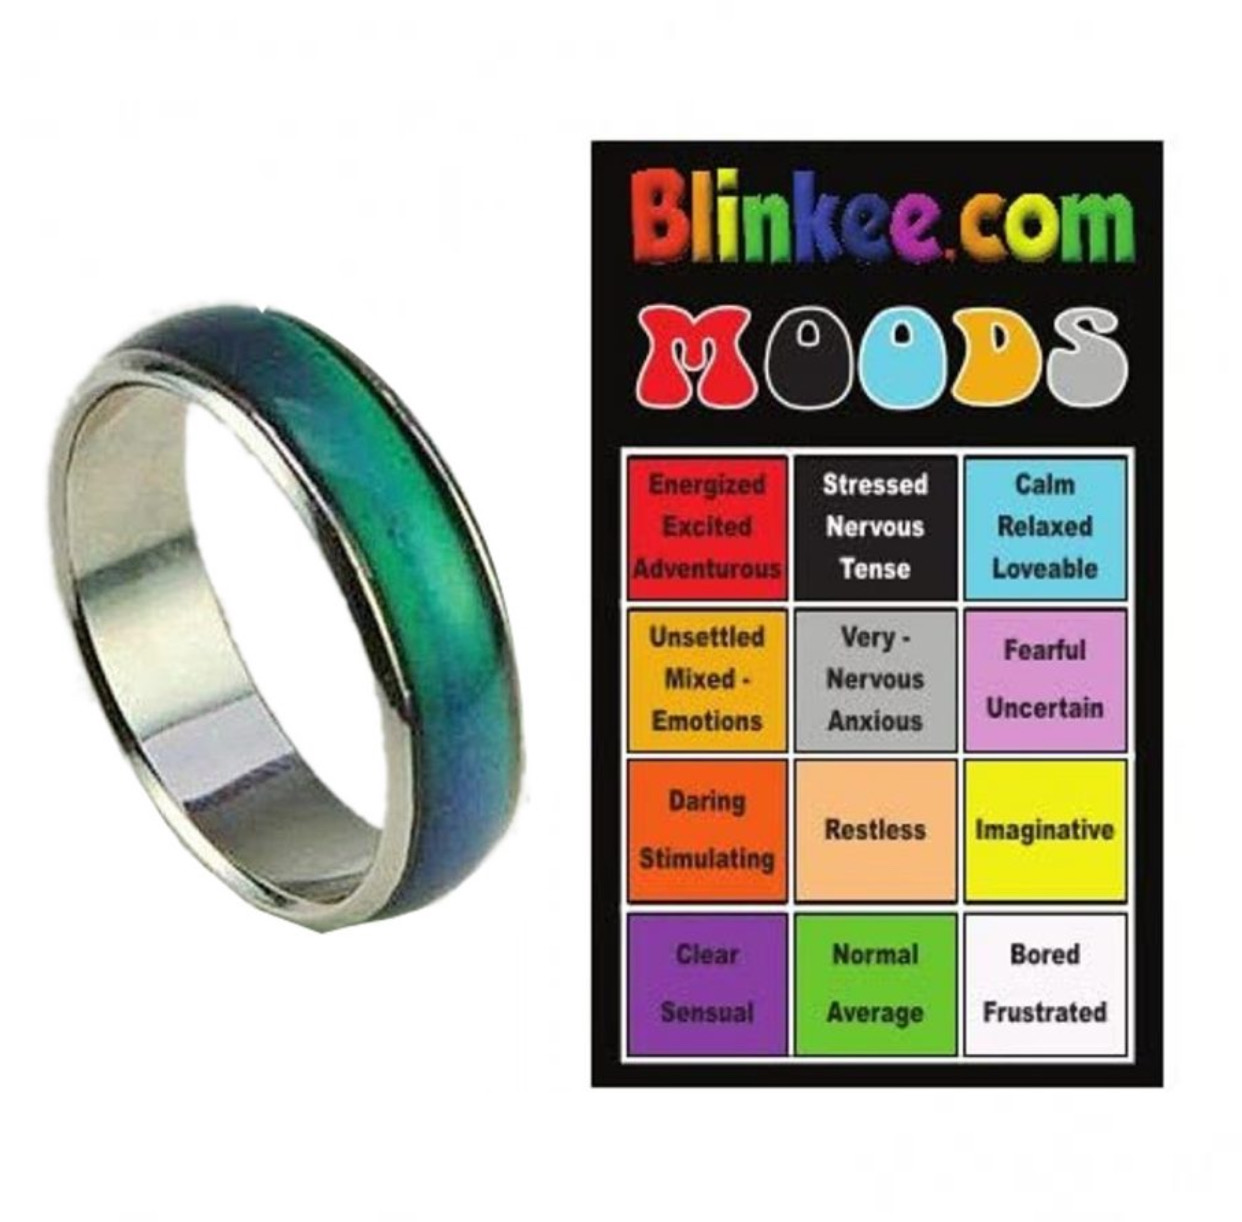 14 Mood Ring Color Meanings Decoded: What They Say About You | LoveToKnow